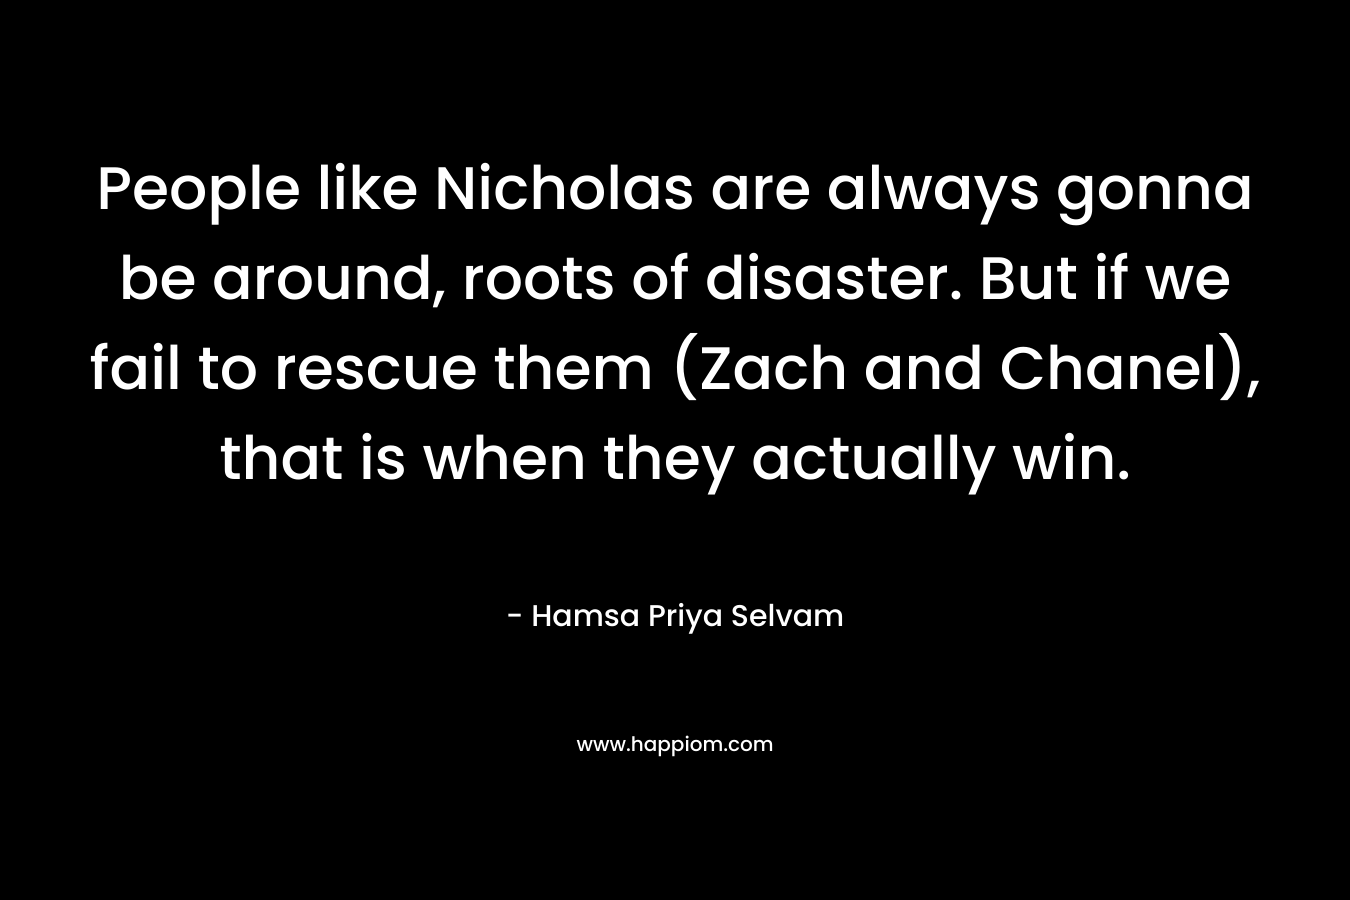 People like Nicholas are always gonna be around, roots of disaster. But if we fail to rescue them (Zach and Chanel), that is when they actually win. – Hamsa Priya Selvam